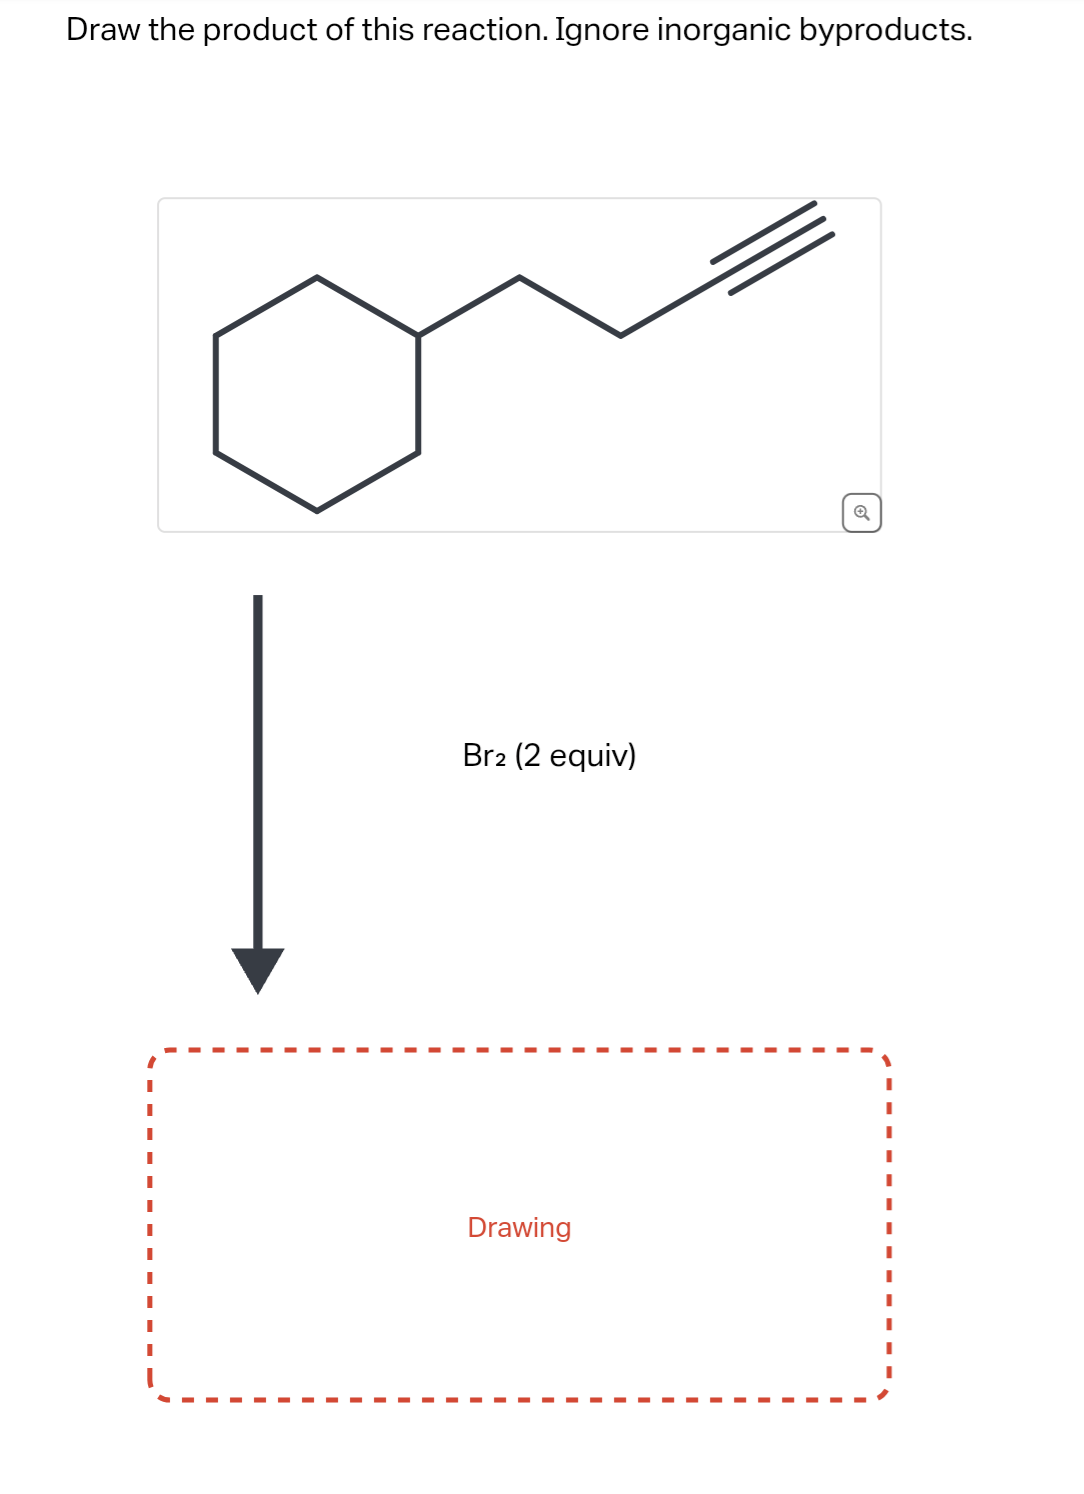 Draw the product of this reaction. Ignore inorganic byproducts.
Br2 (2 equiv)
Drawing
Q